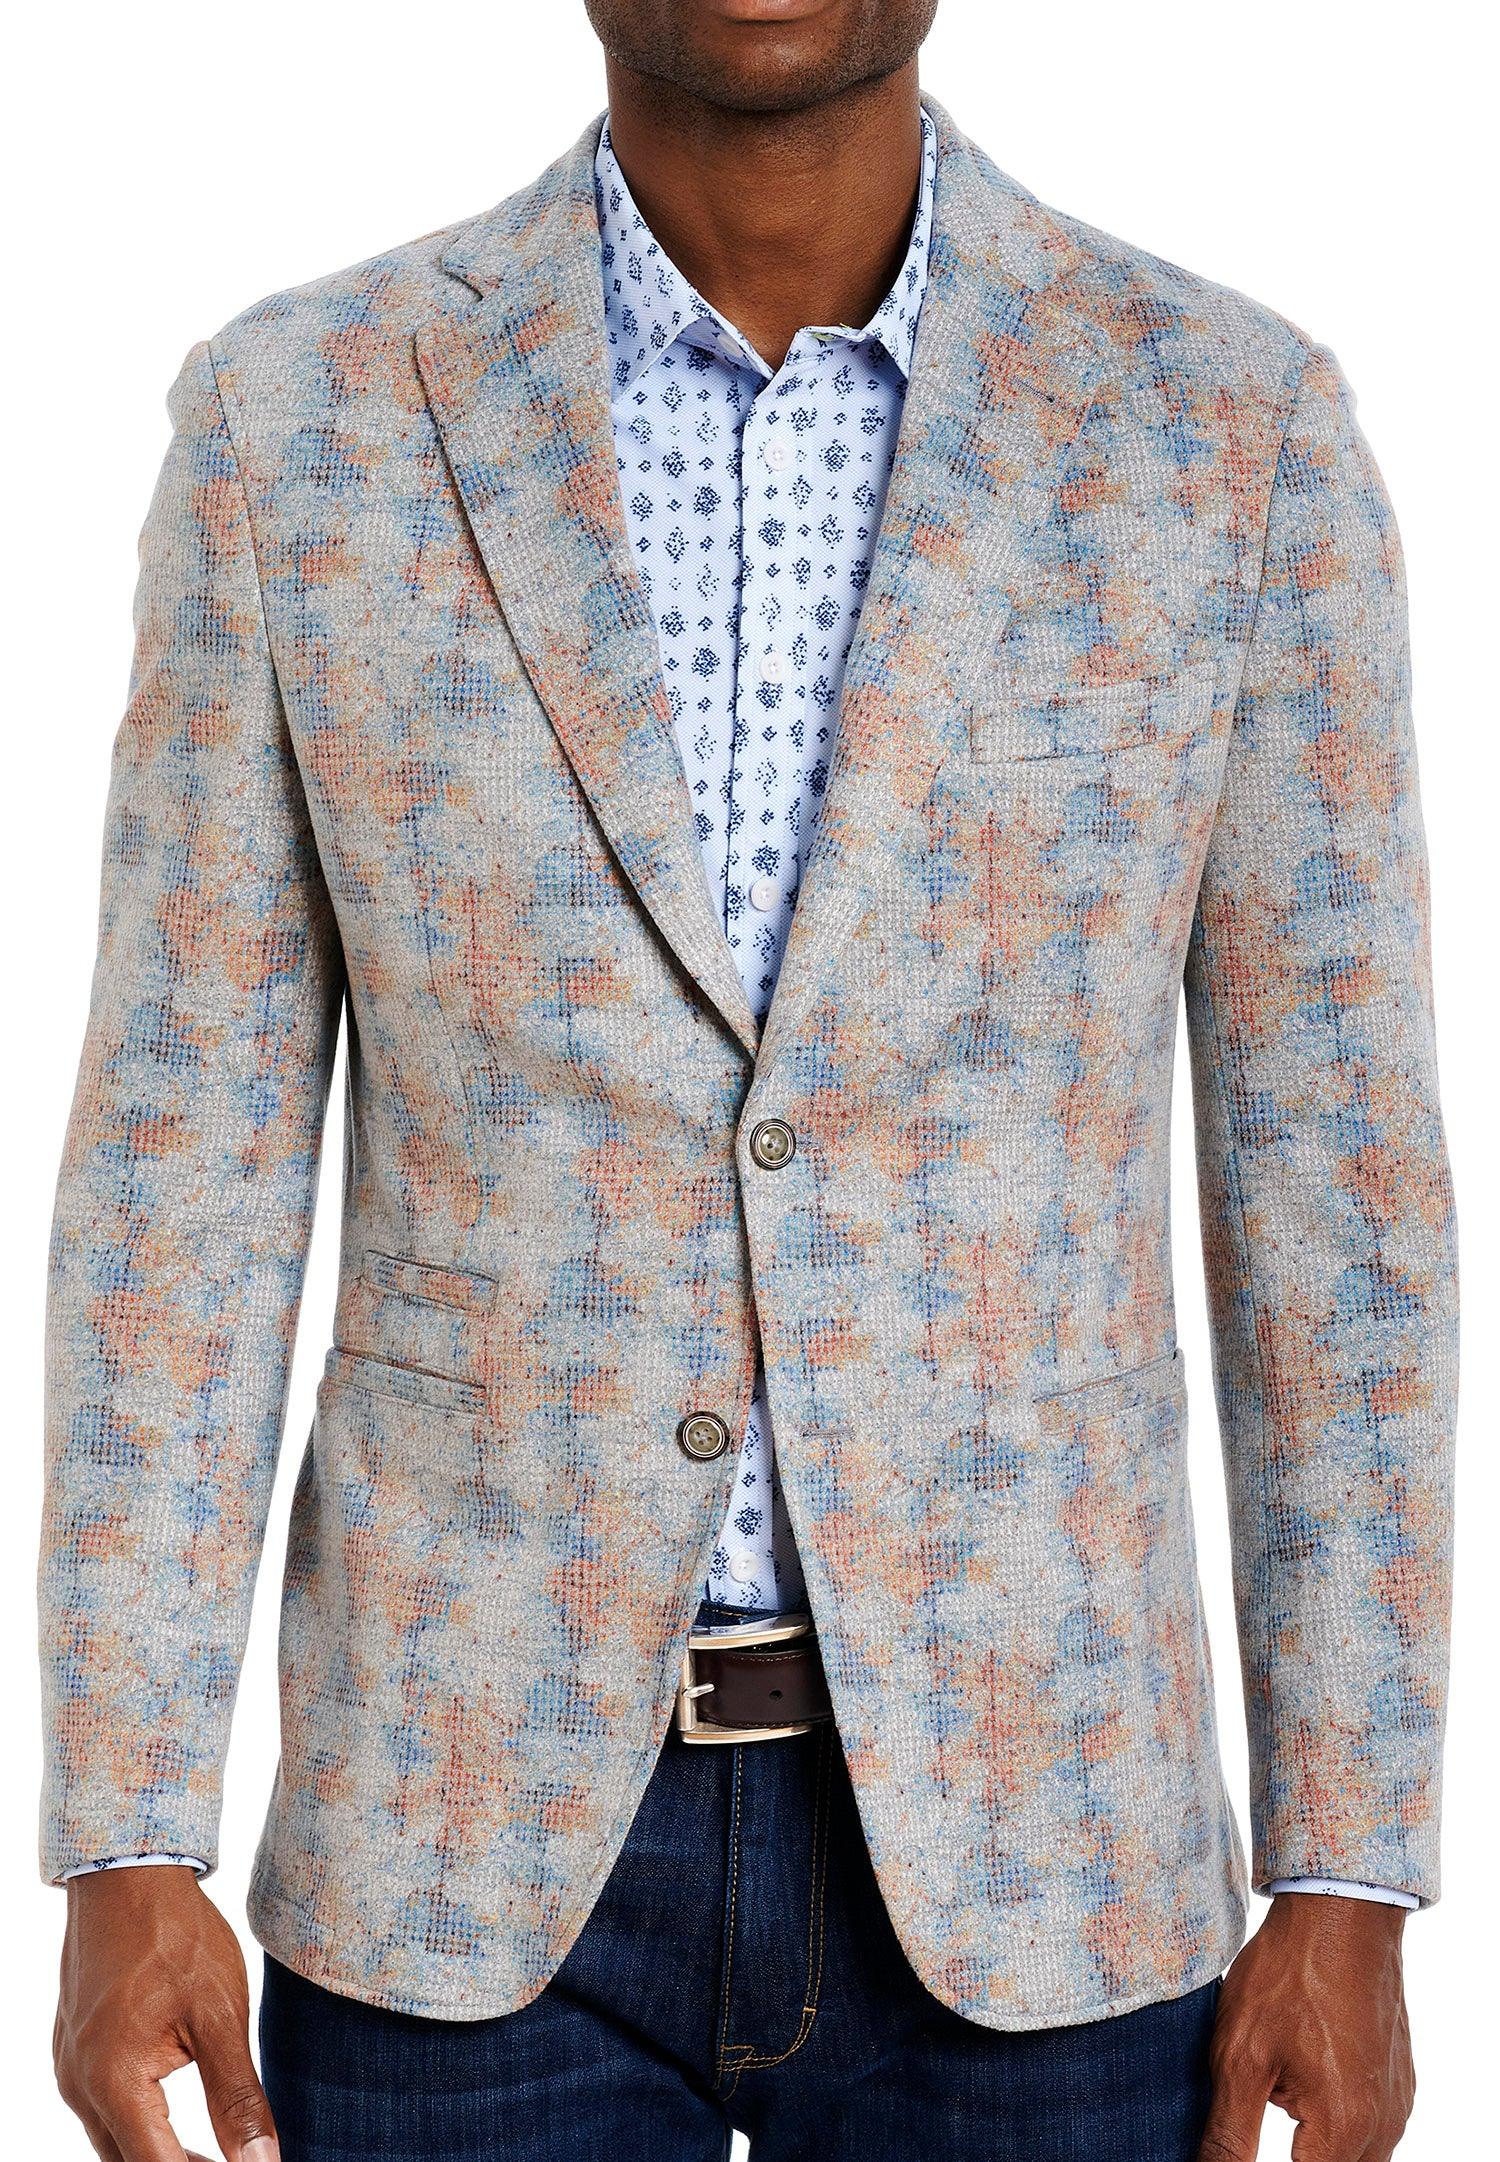 Robert Graham Velour Colors Sport Coat  Part of the Robert Graham exclusive sport collection. Abstract tonal colors add depth. Partial lining, signature Graham detailing inside and out. Modern Fit for a slim to medium build.